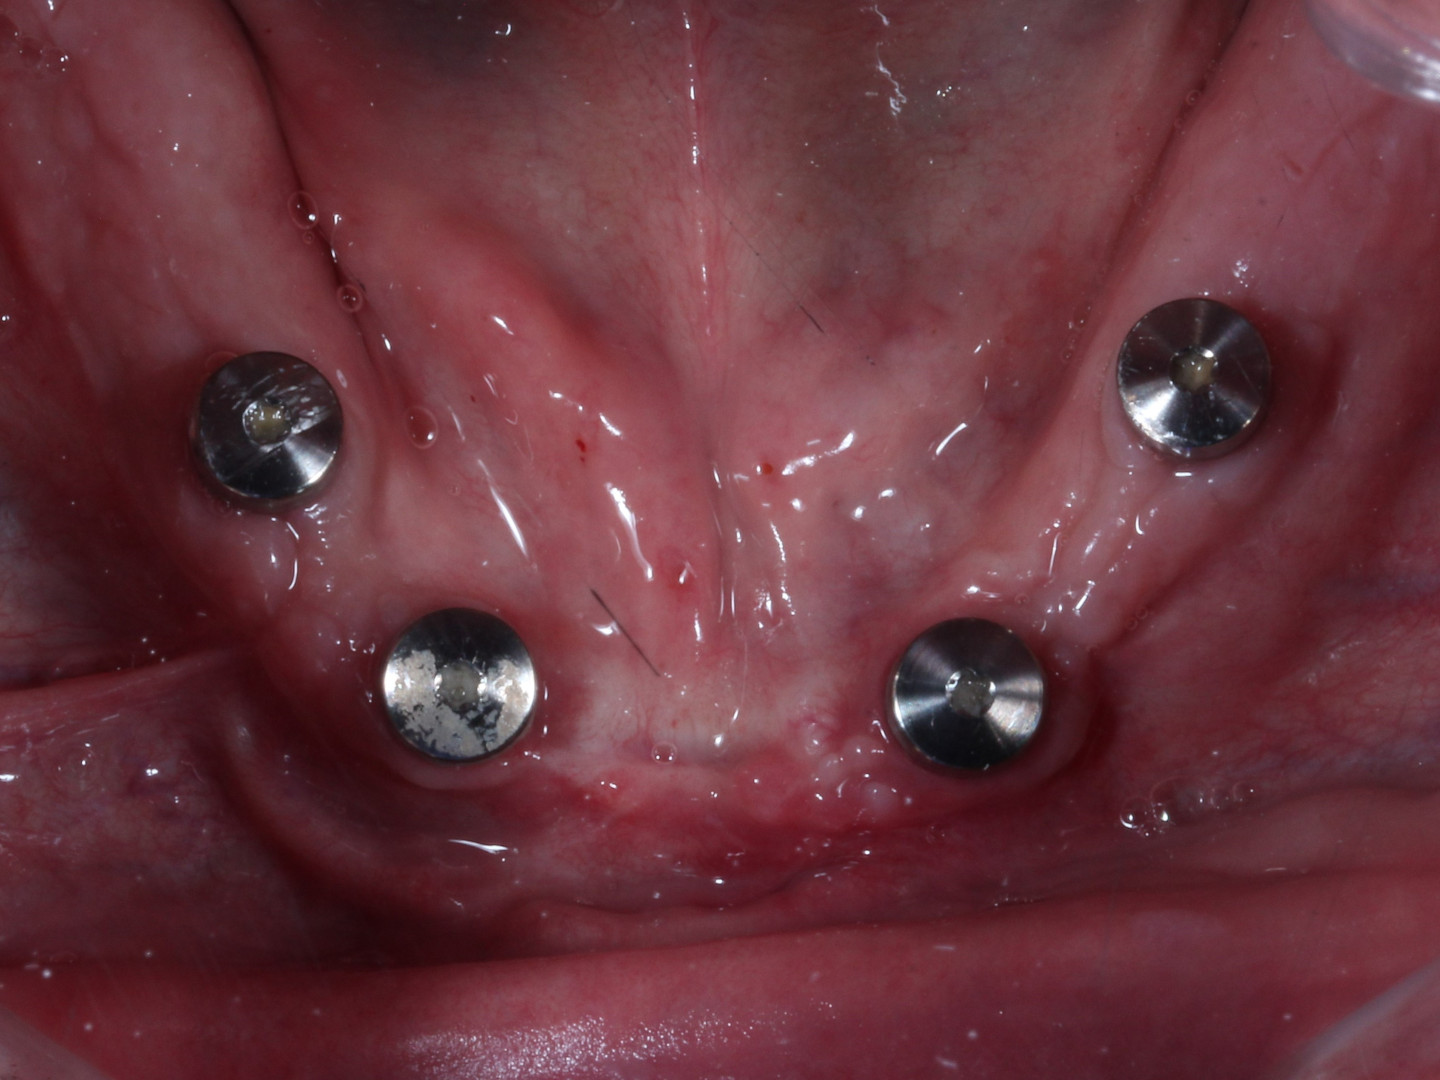 Fig. 2: Dental implants placed in the lower jaw.